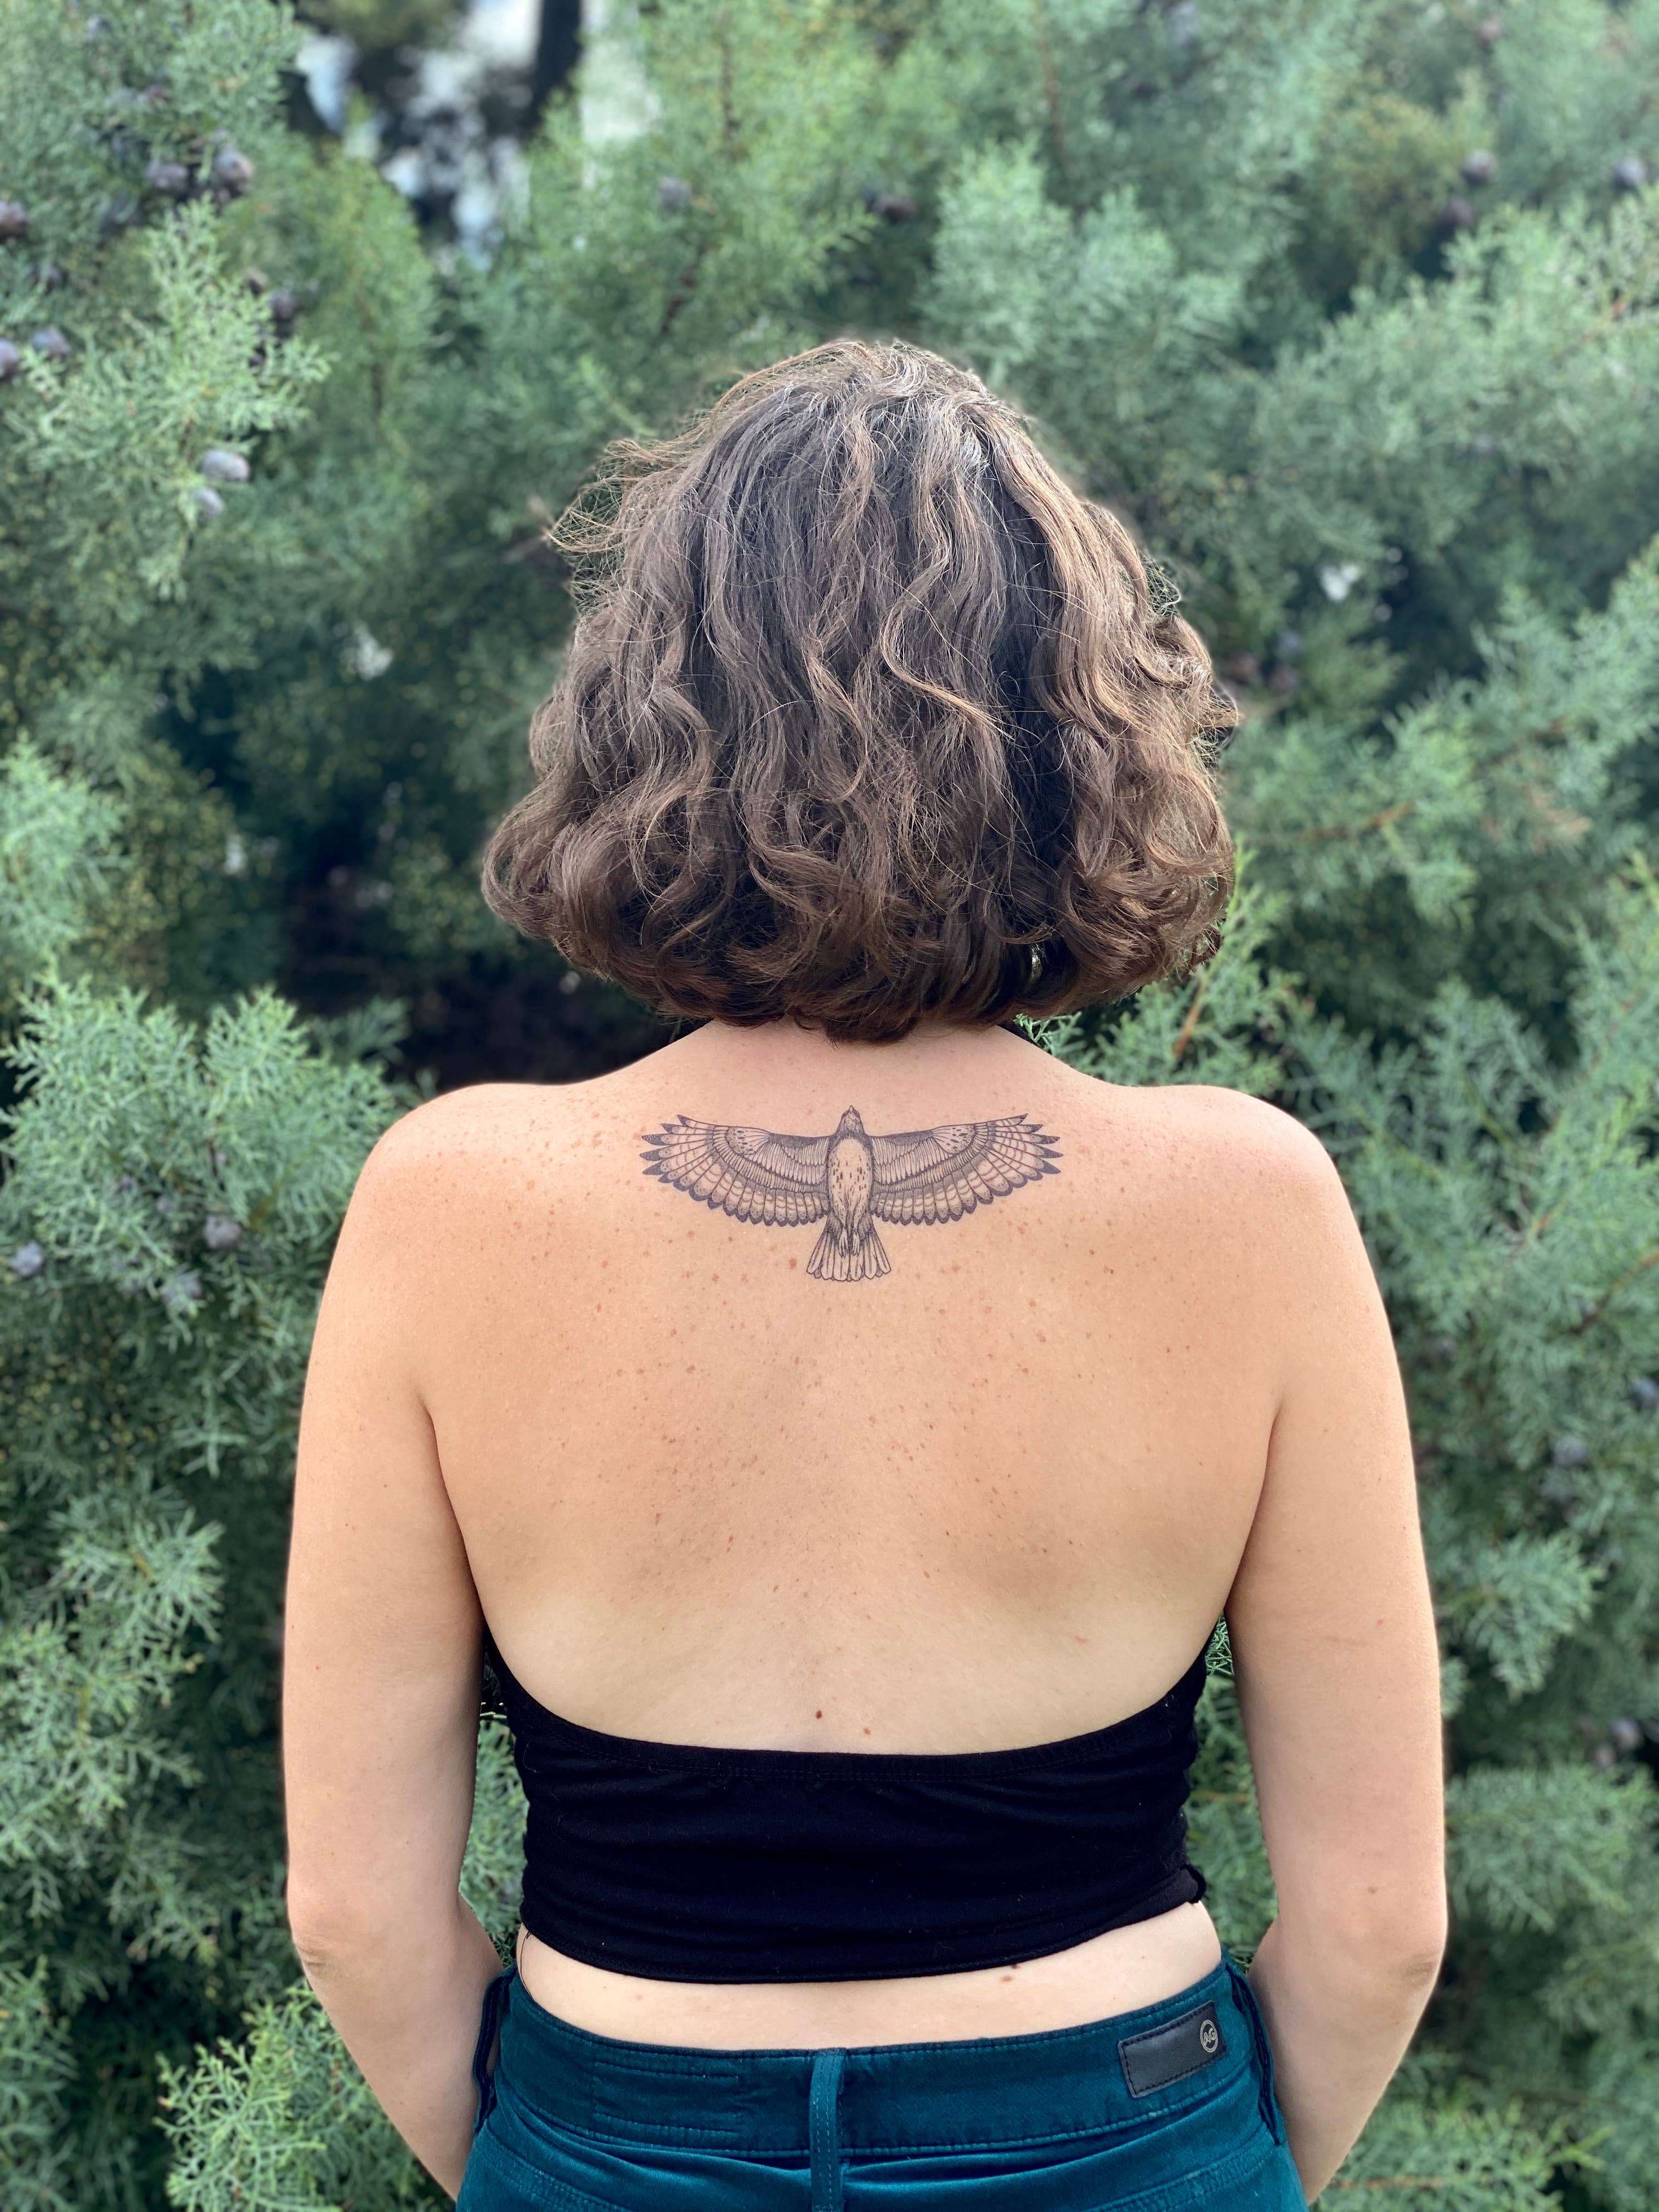 Timeless Bird Tattoos: Are They Meaningful?